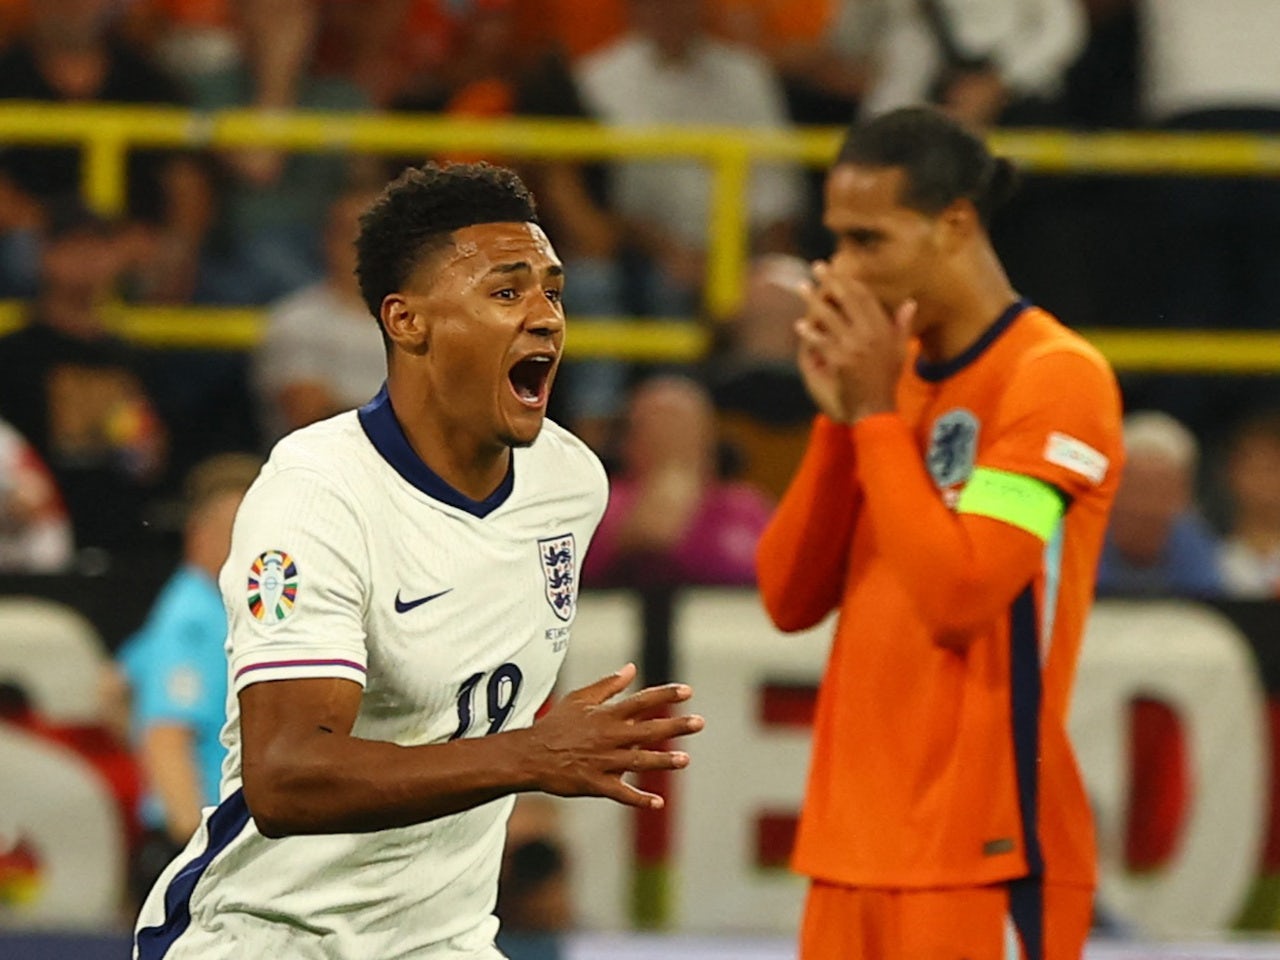 Netherlands 1-2 England: Three Lions have shot at redemption after late show